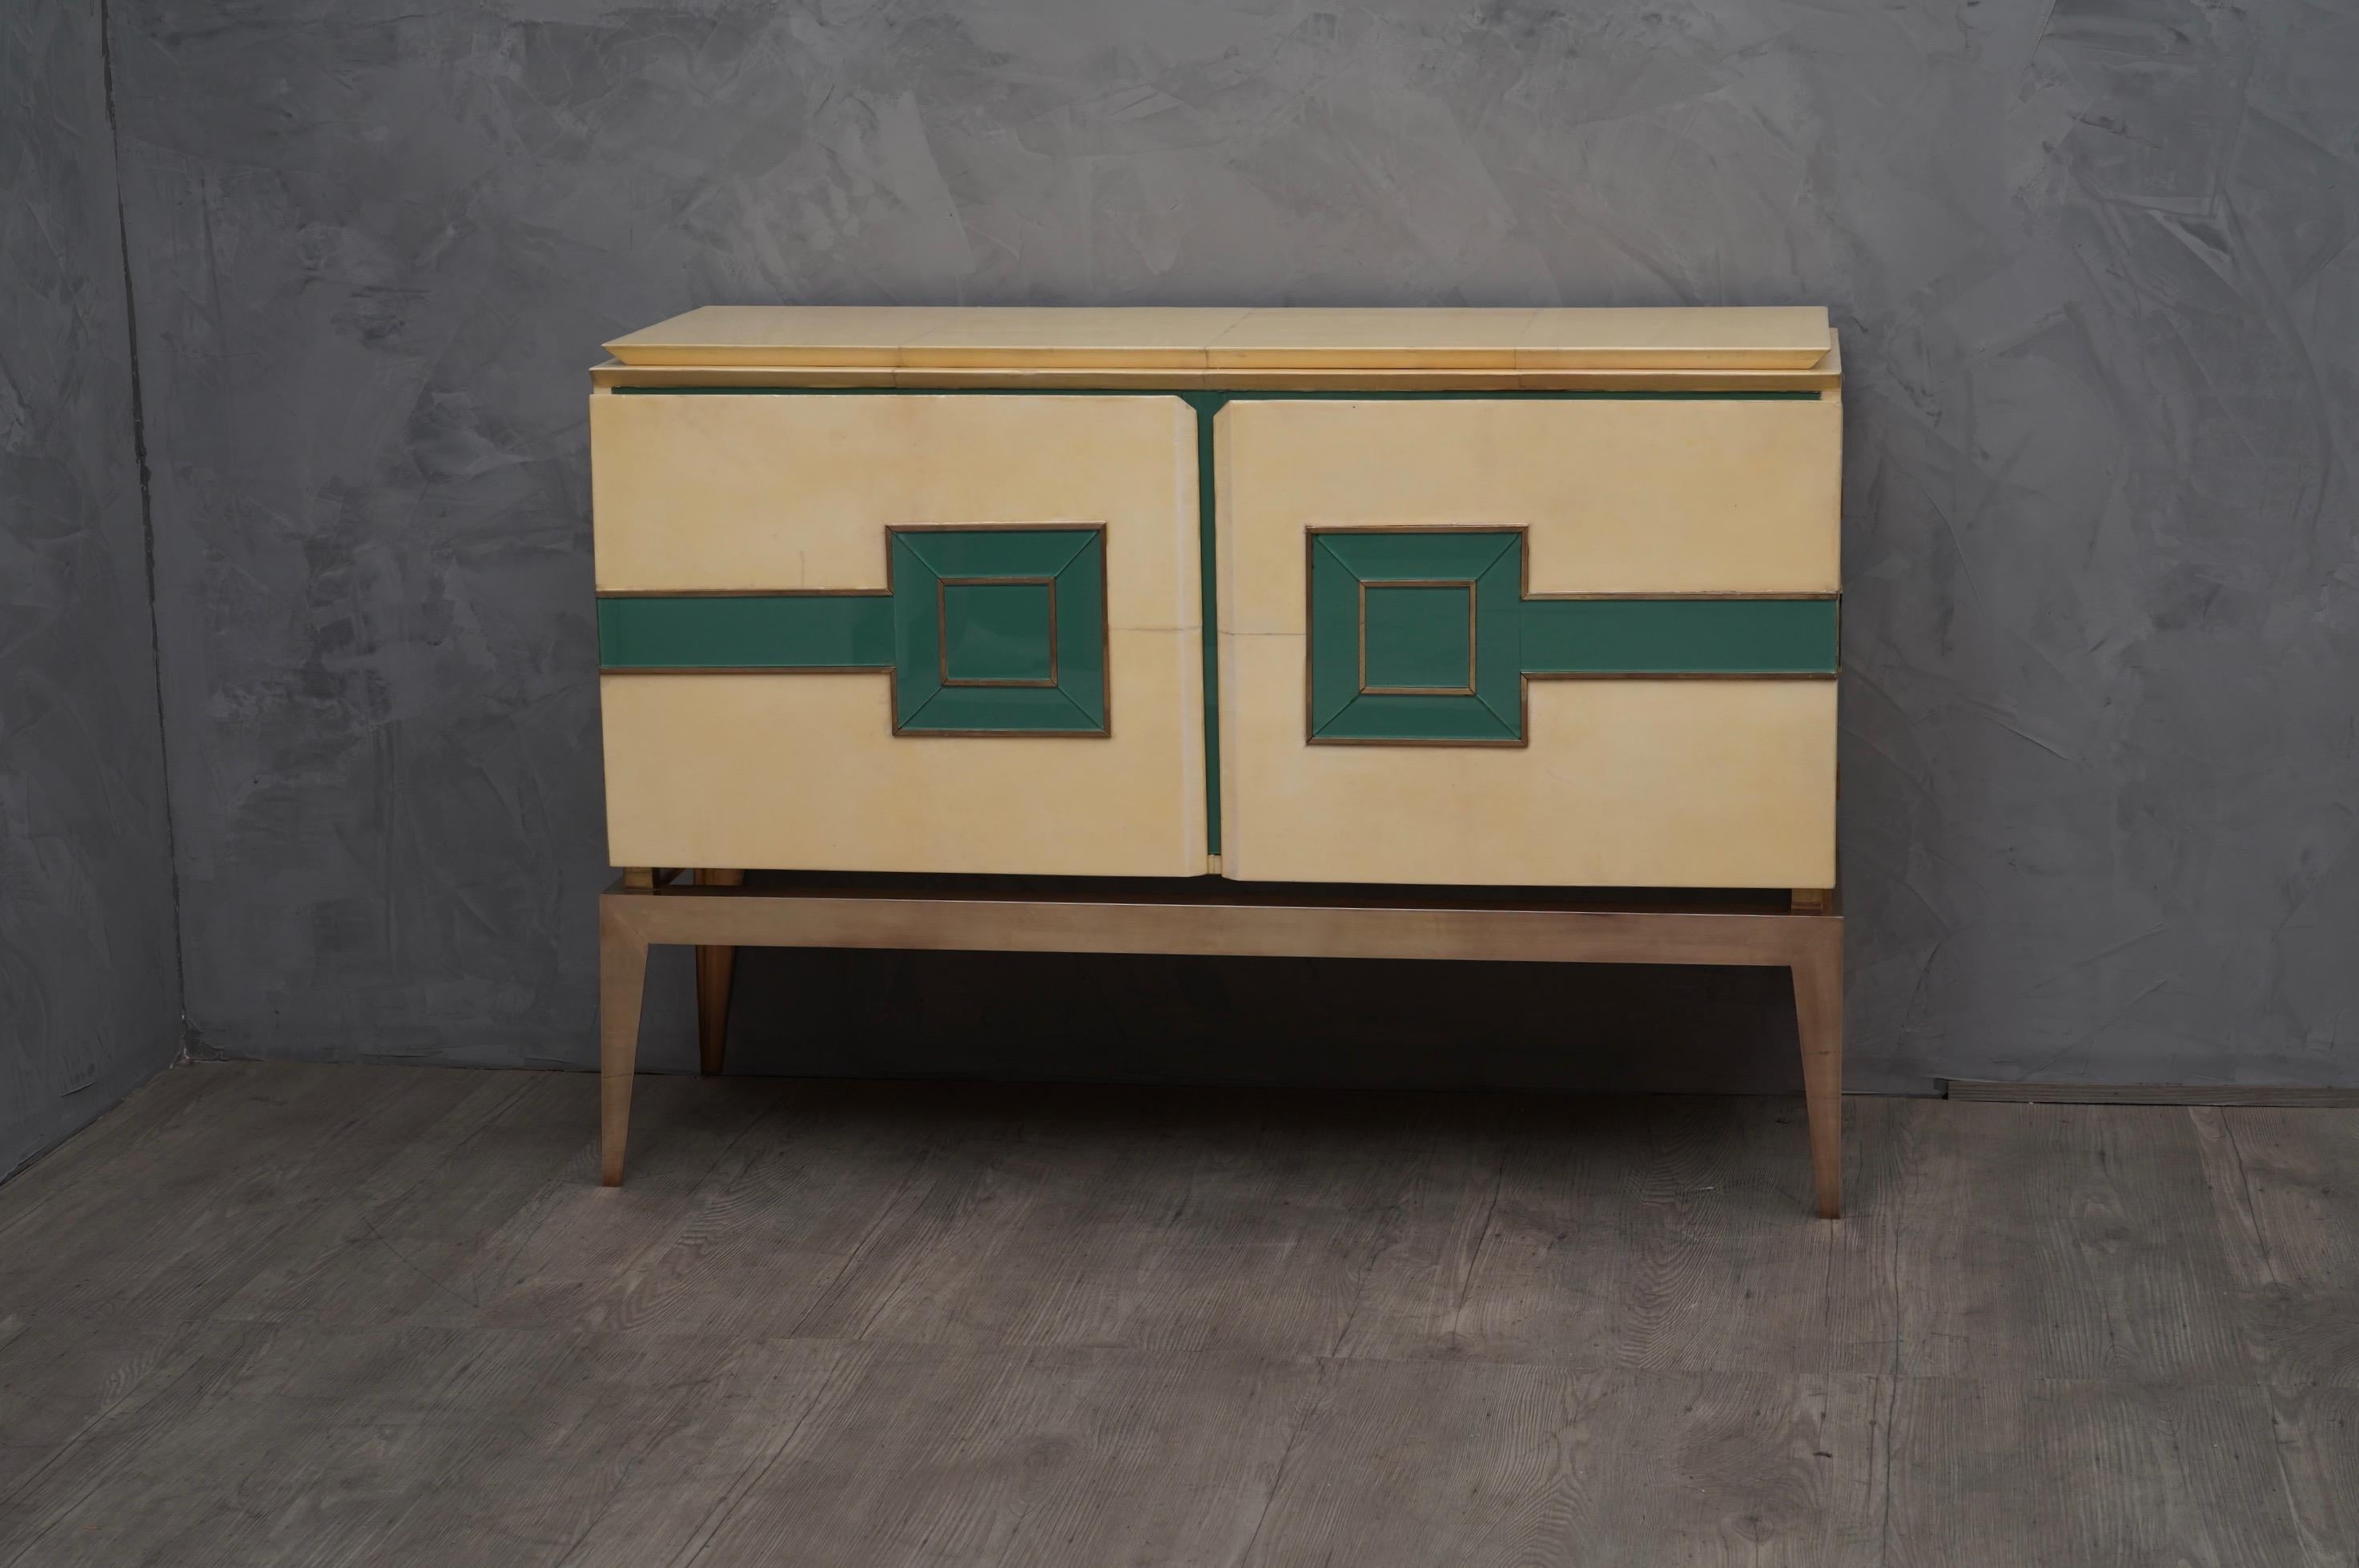 Bright colors and stylish look for this sideboard from the mid-20th century, design and materials of value, vitrified goatskin, glass and brass. An exaggerated elegance for this sideboard of Italian manufacture highly sought after, unfortunately not